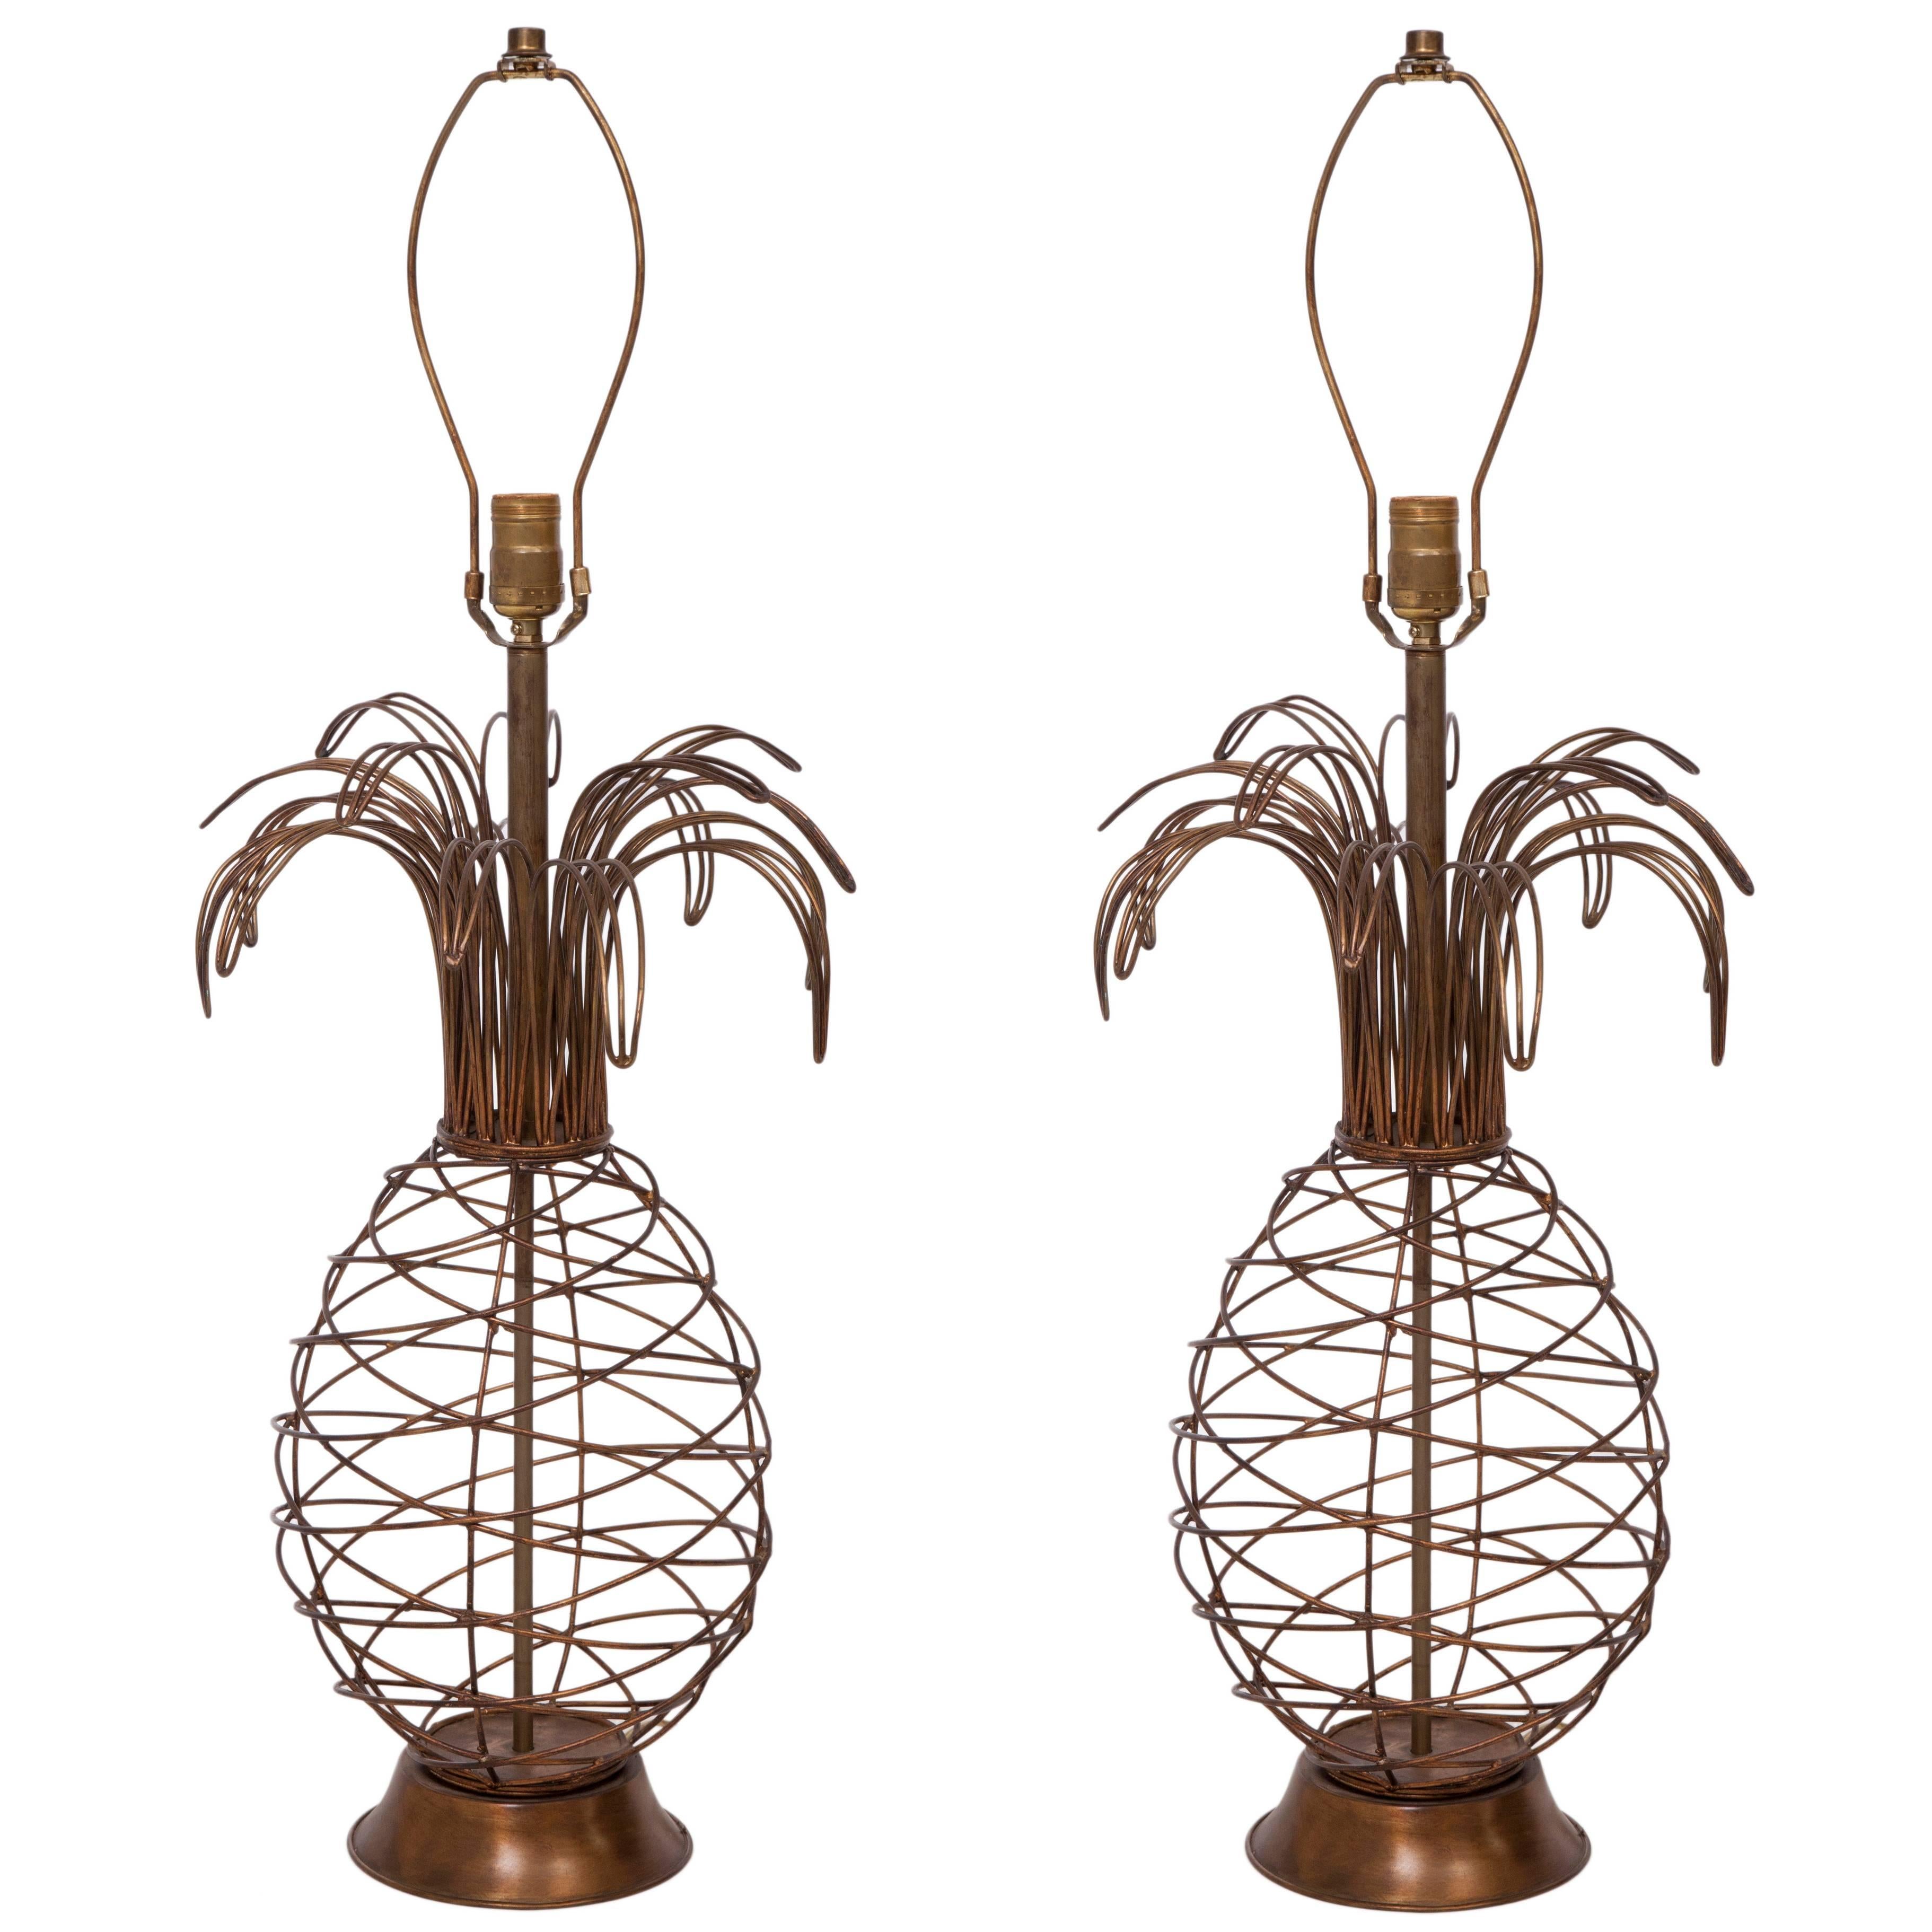 A Pair of Midcentury Metal Wire Pineapple Form Table Lamps